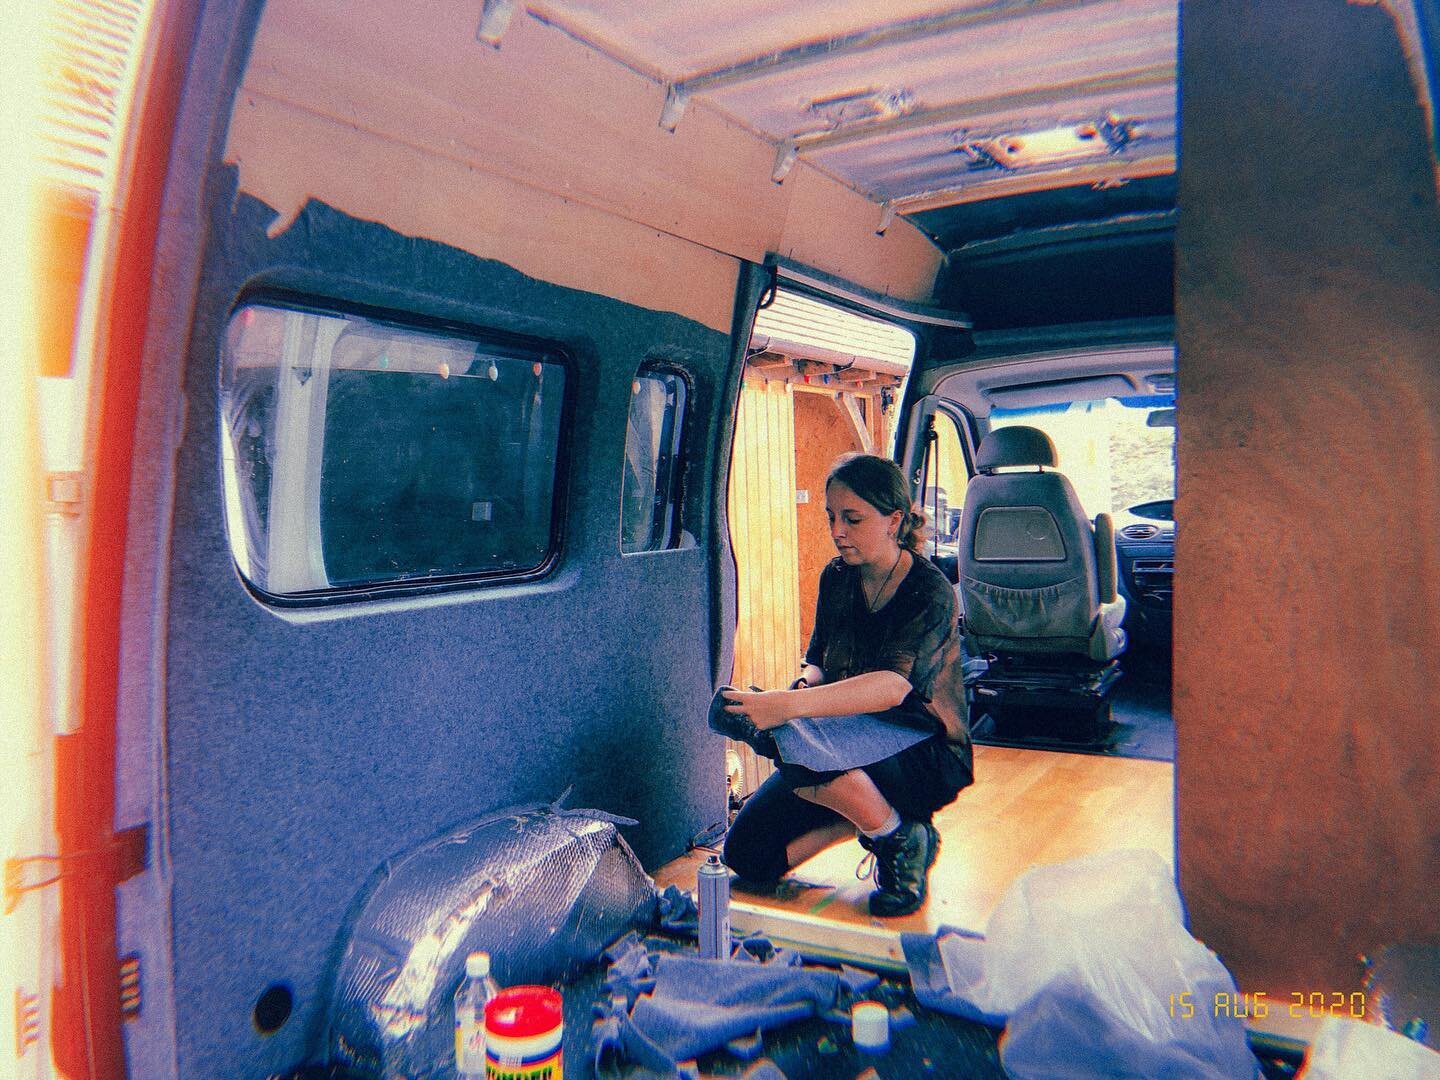 Getting our vehicle carpet in and around the window edges! 
Max is looking finished in some places now! 
Can&rsquo;t wait to start cladding from above the windows soon 
.
.
.
.
#vanbuild #vanconversion #diycamper #selfbuildcamper #minibusconversion #